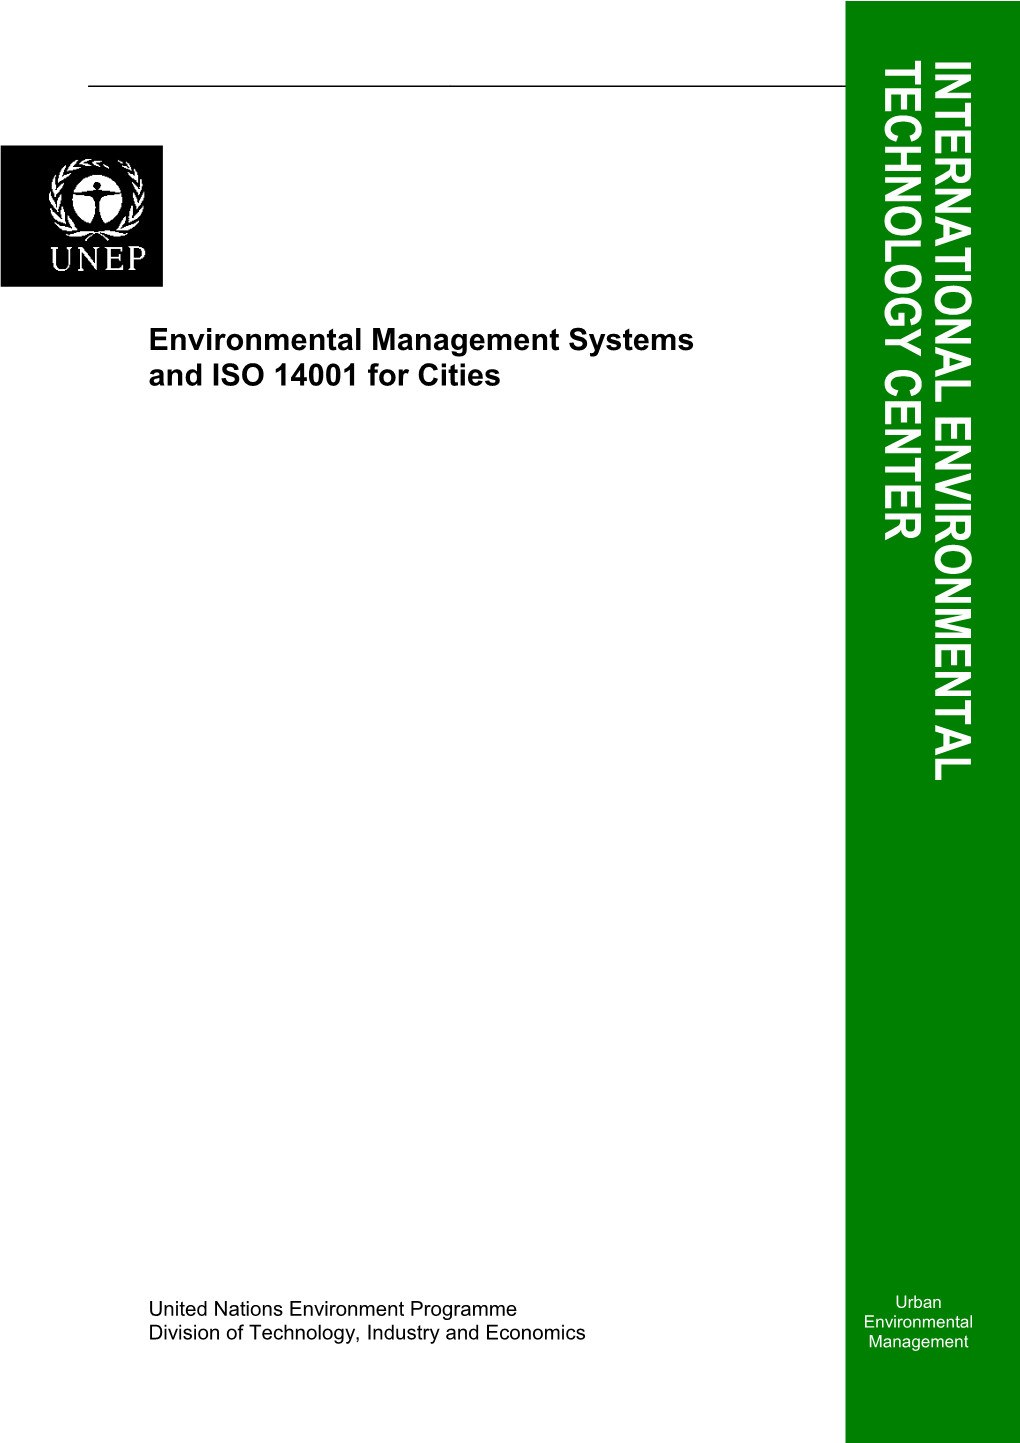 Environmental Management Systems and ISO 14001 for Cities